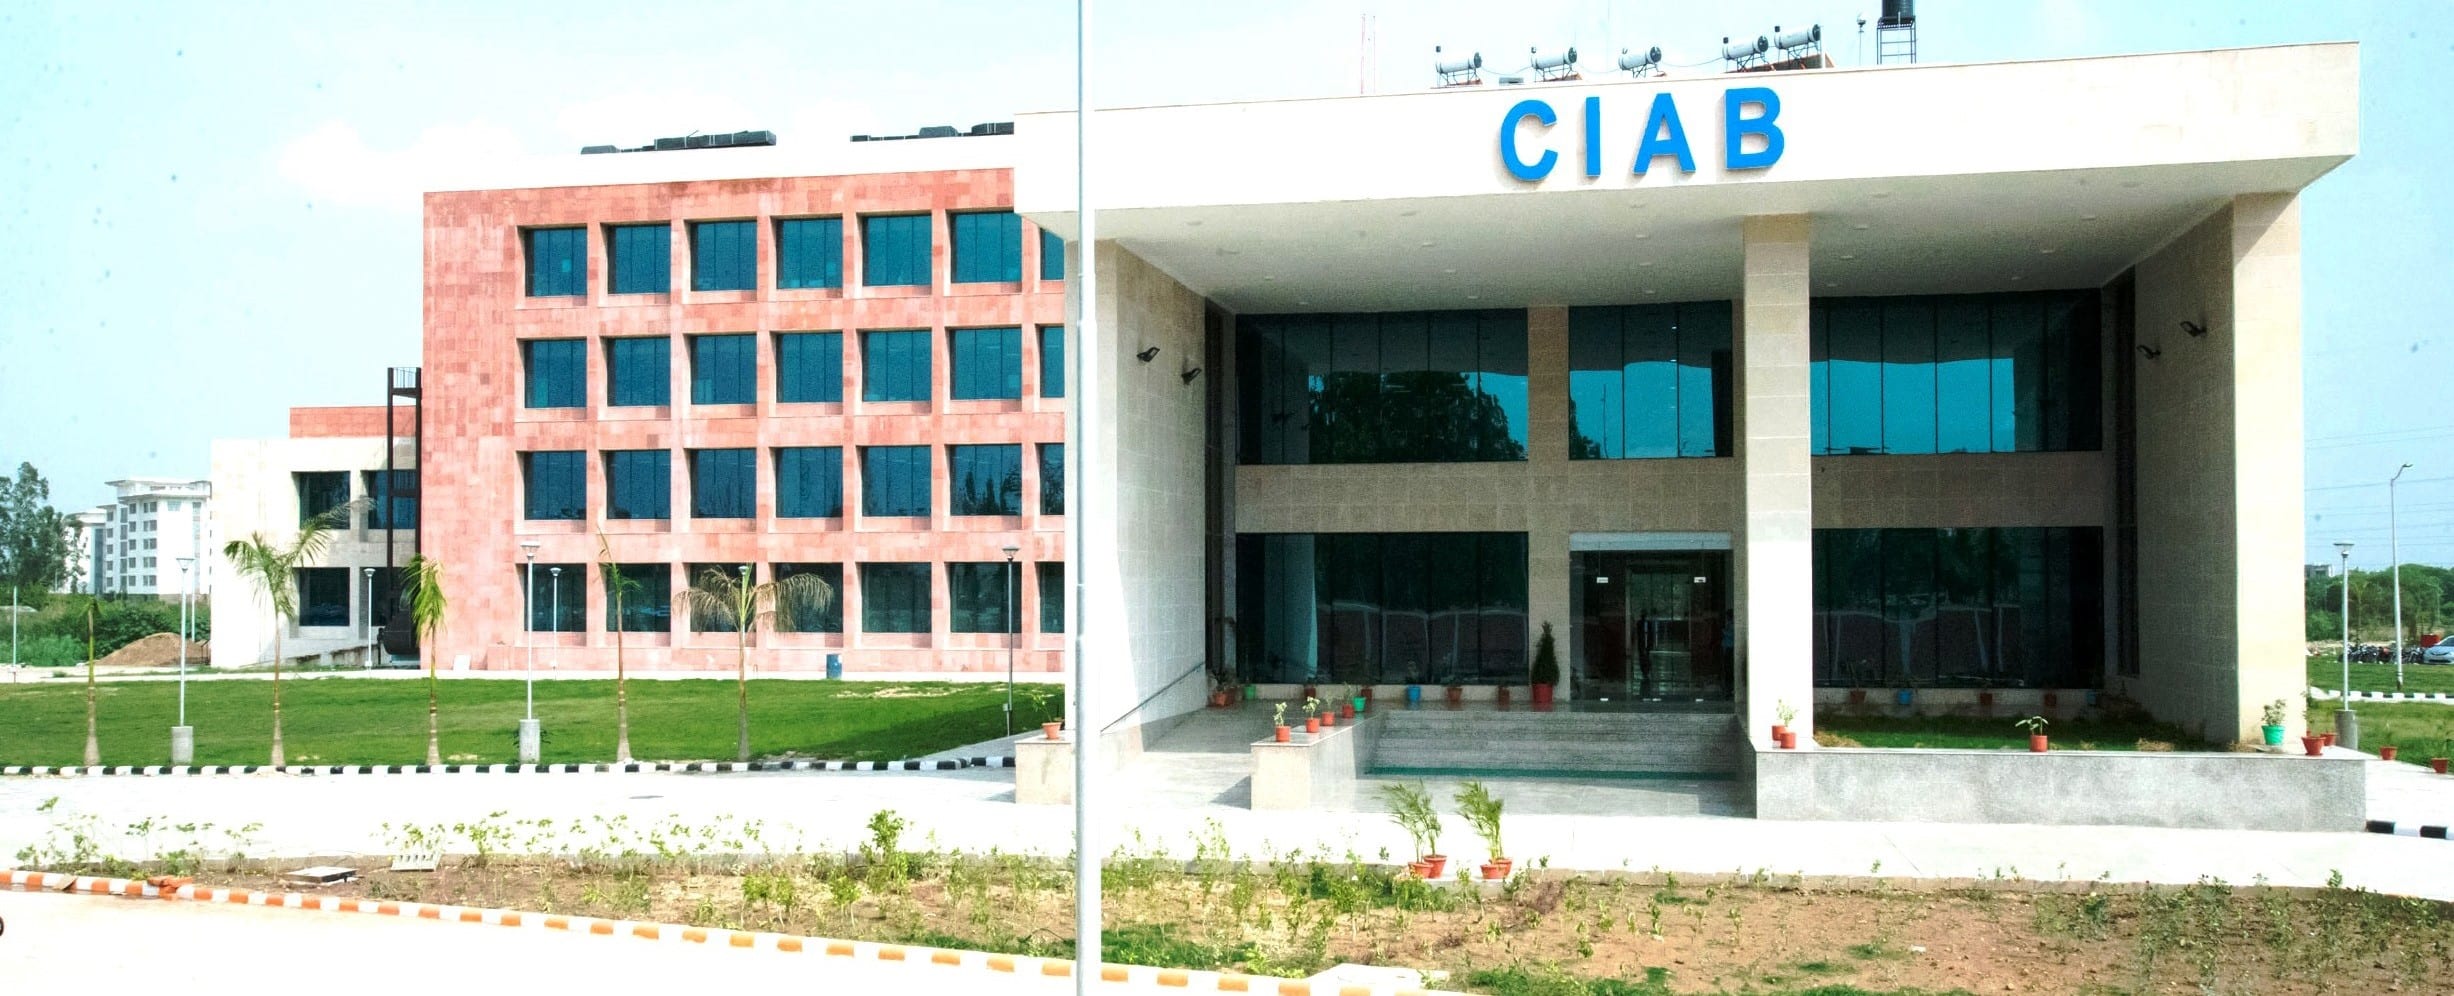 PhD (Biotechnology) Program Admission 2018 by Center of Innovative and Applied Bioprocessing (CIAB) Mohali